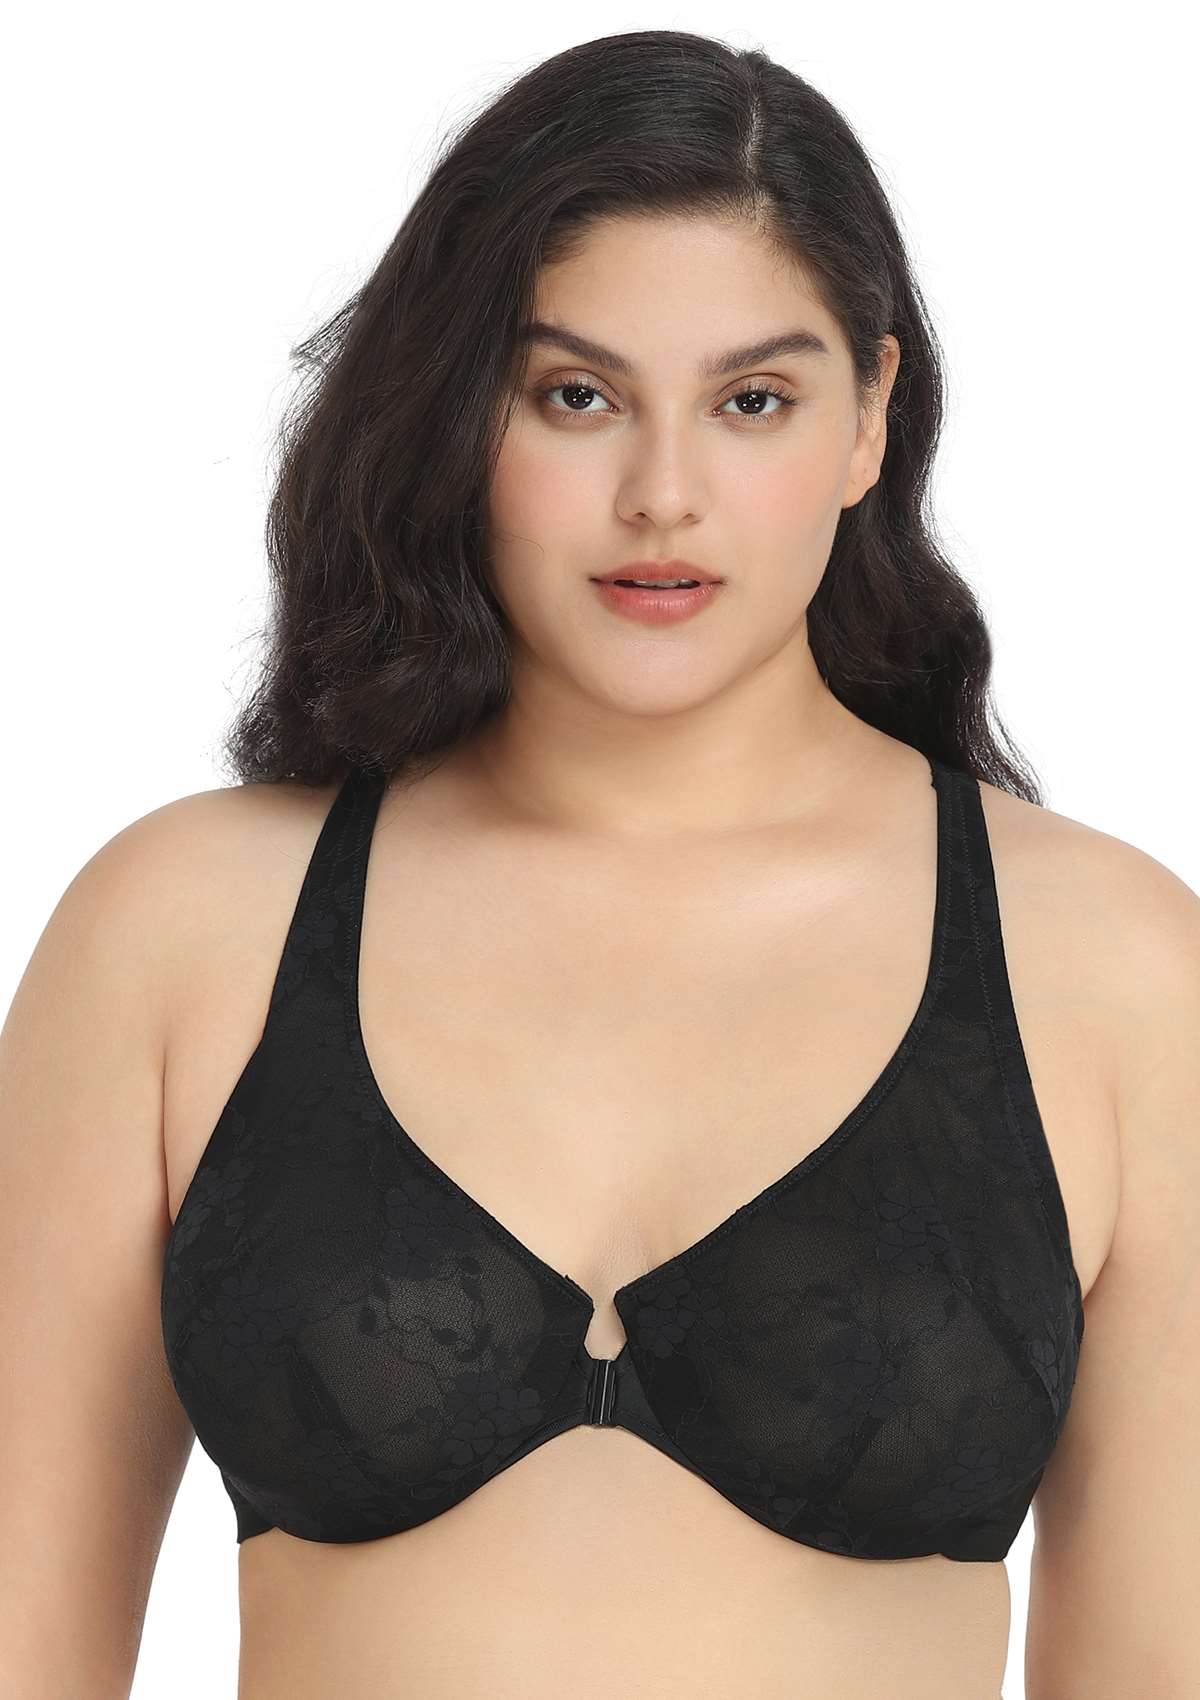 HSIA Spring Romance Front-Close Floral Lace Unlined Full Coverage Bra - Black / 40 / G